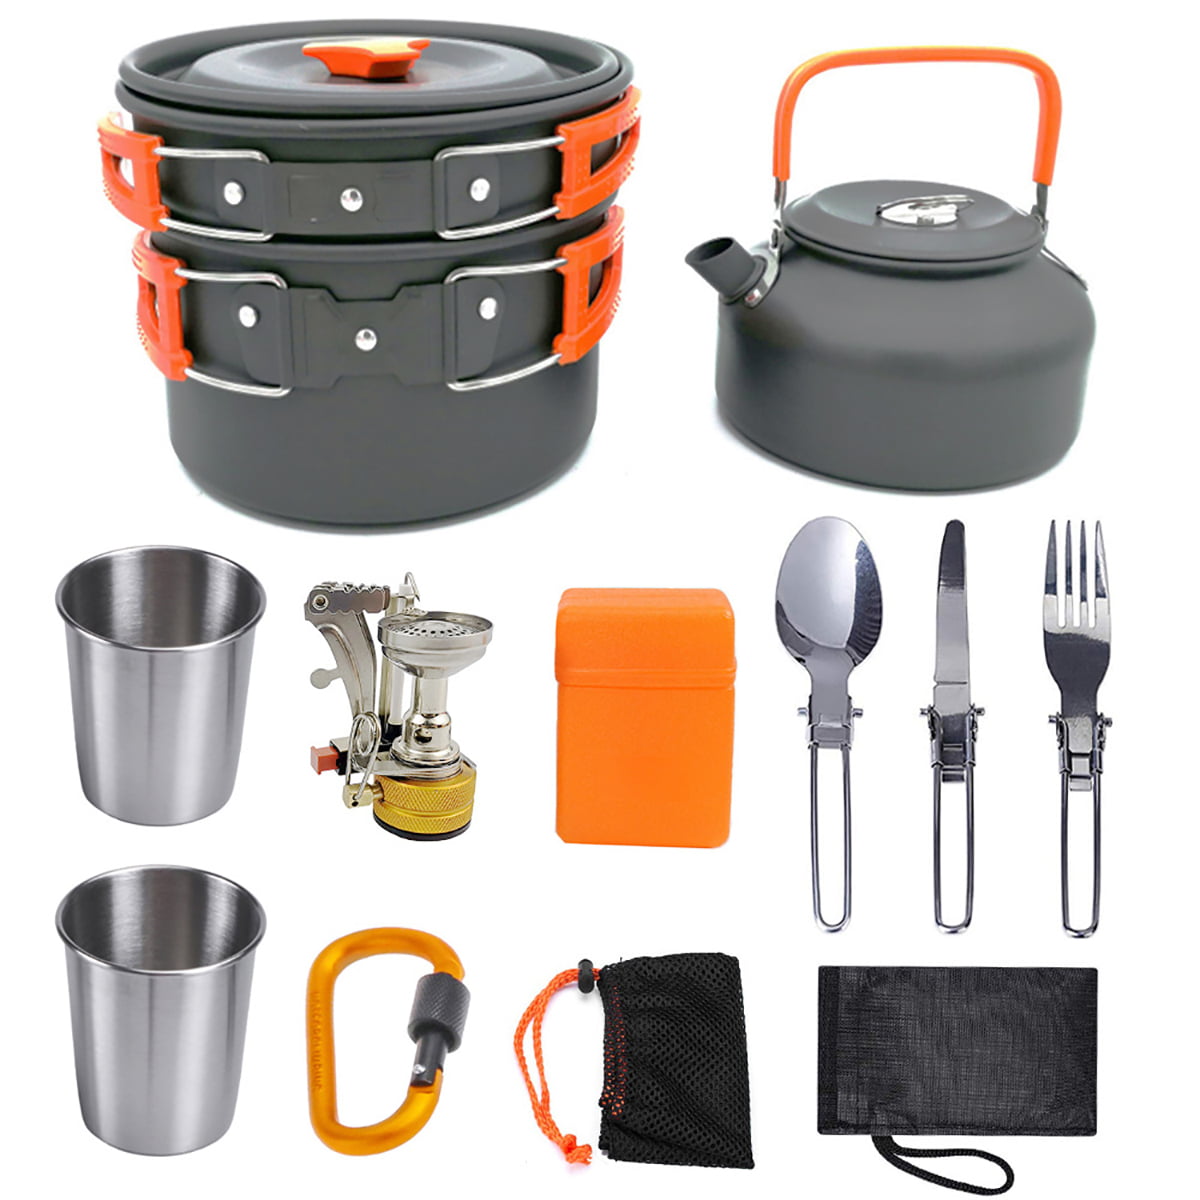 Outdoor Cooking Set Non Stick Pot and Pans Lightweight Backpacking Hiking Utensil Gear for 1 to 2 People Traveling Trekking and Camping Odoland Camping Cookware Kit with Stove